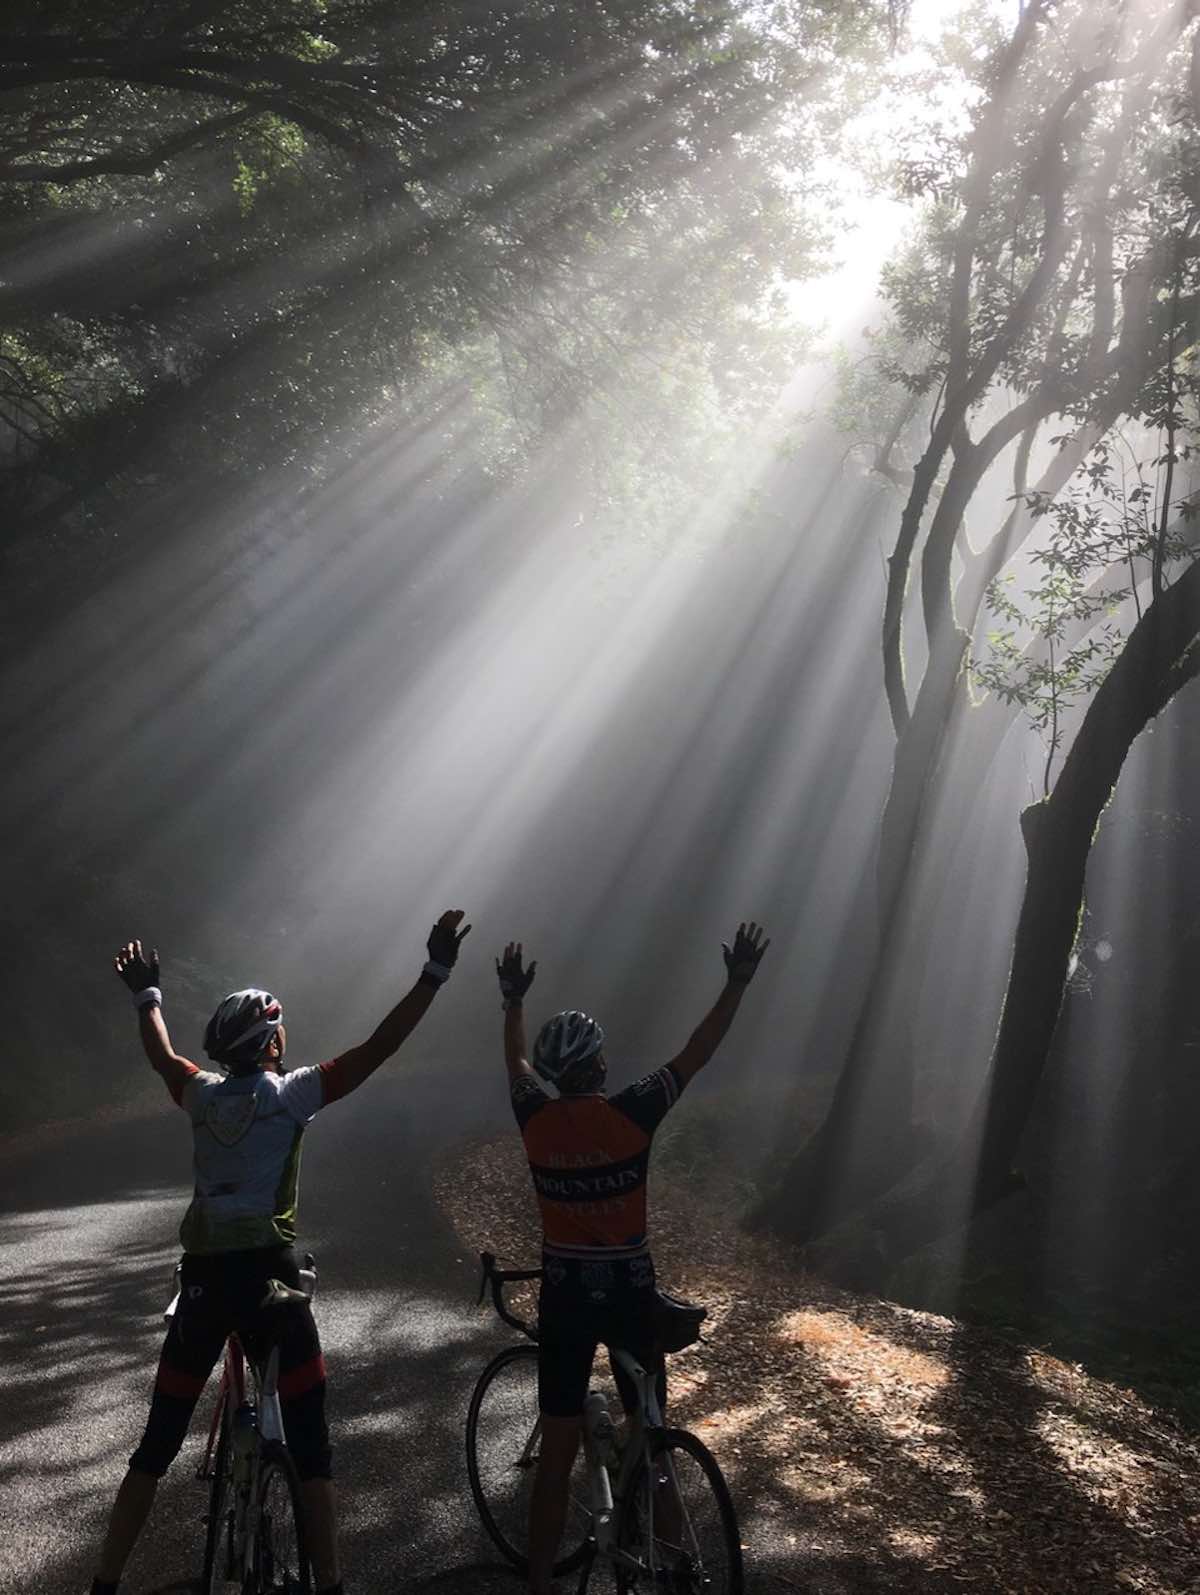 bikerumor pic of the day two cyclists with their arms up towards the rays of sunshine peering through the tree canopy over the road to mount tamalpais in marin county california.